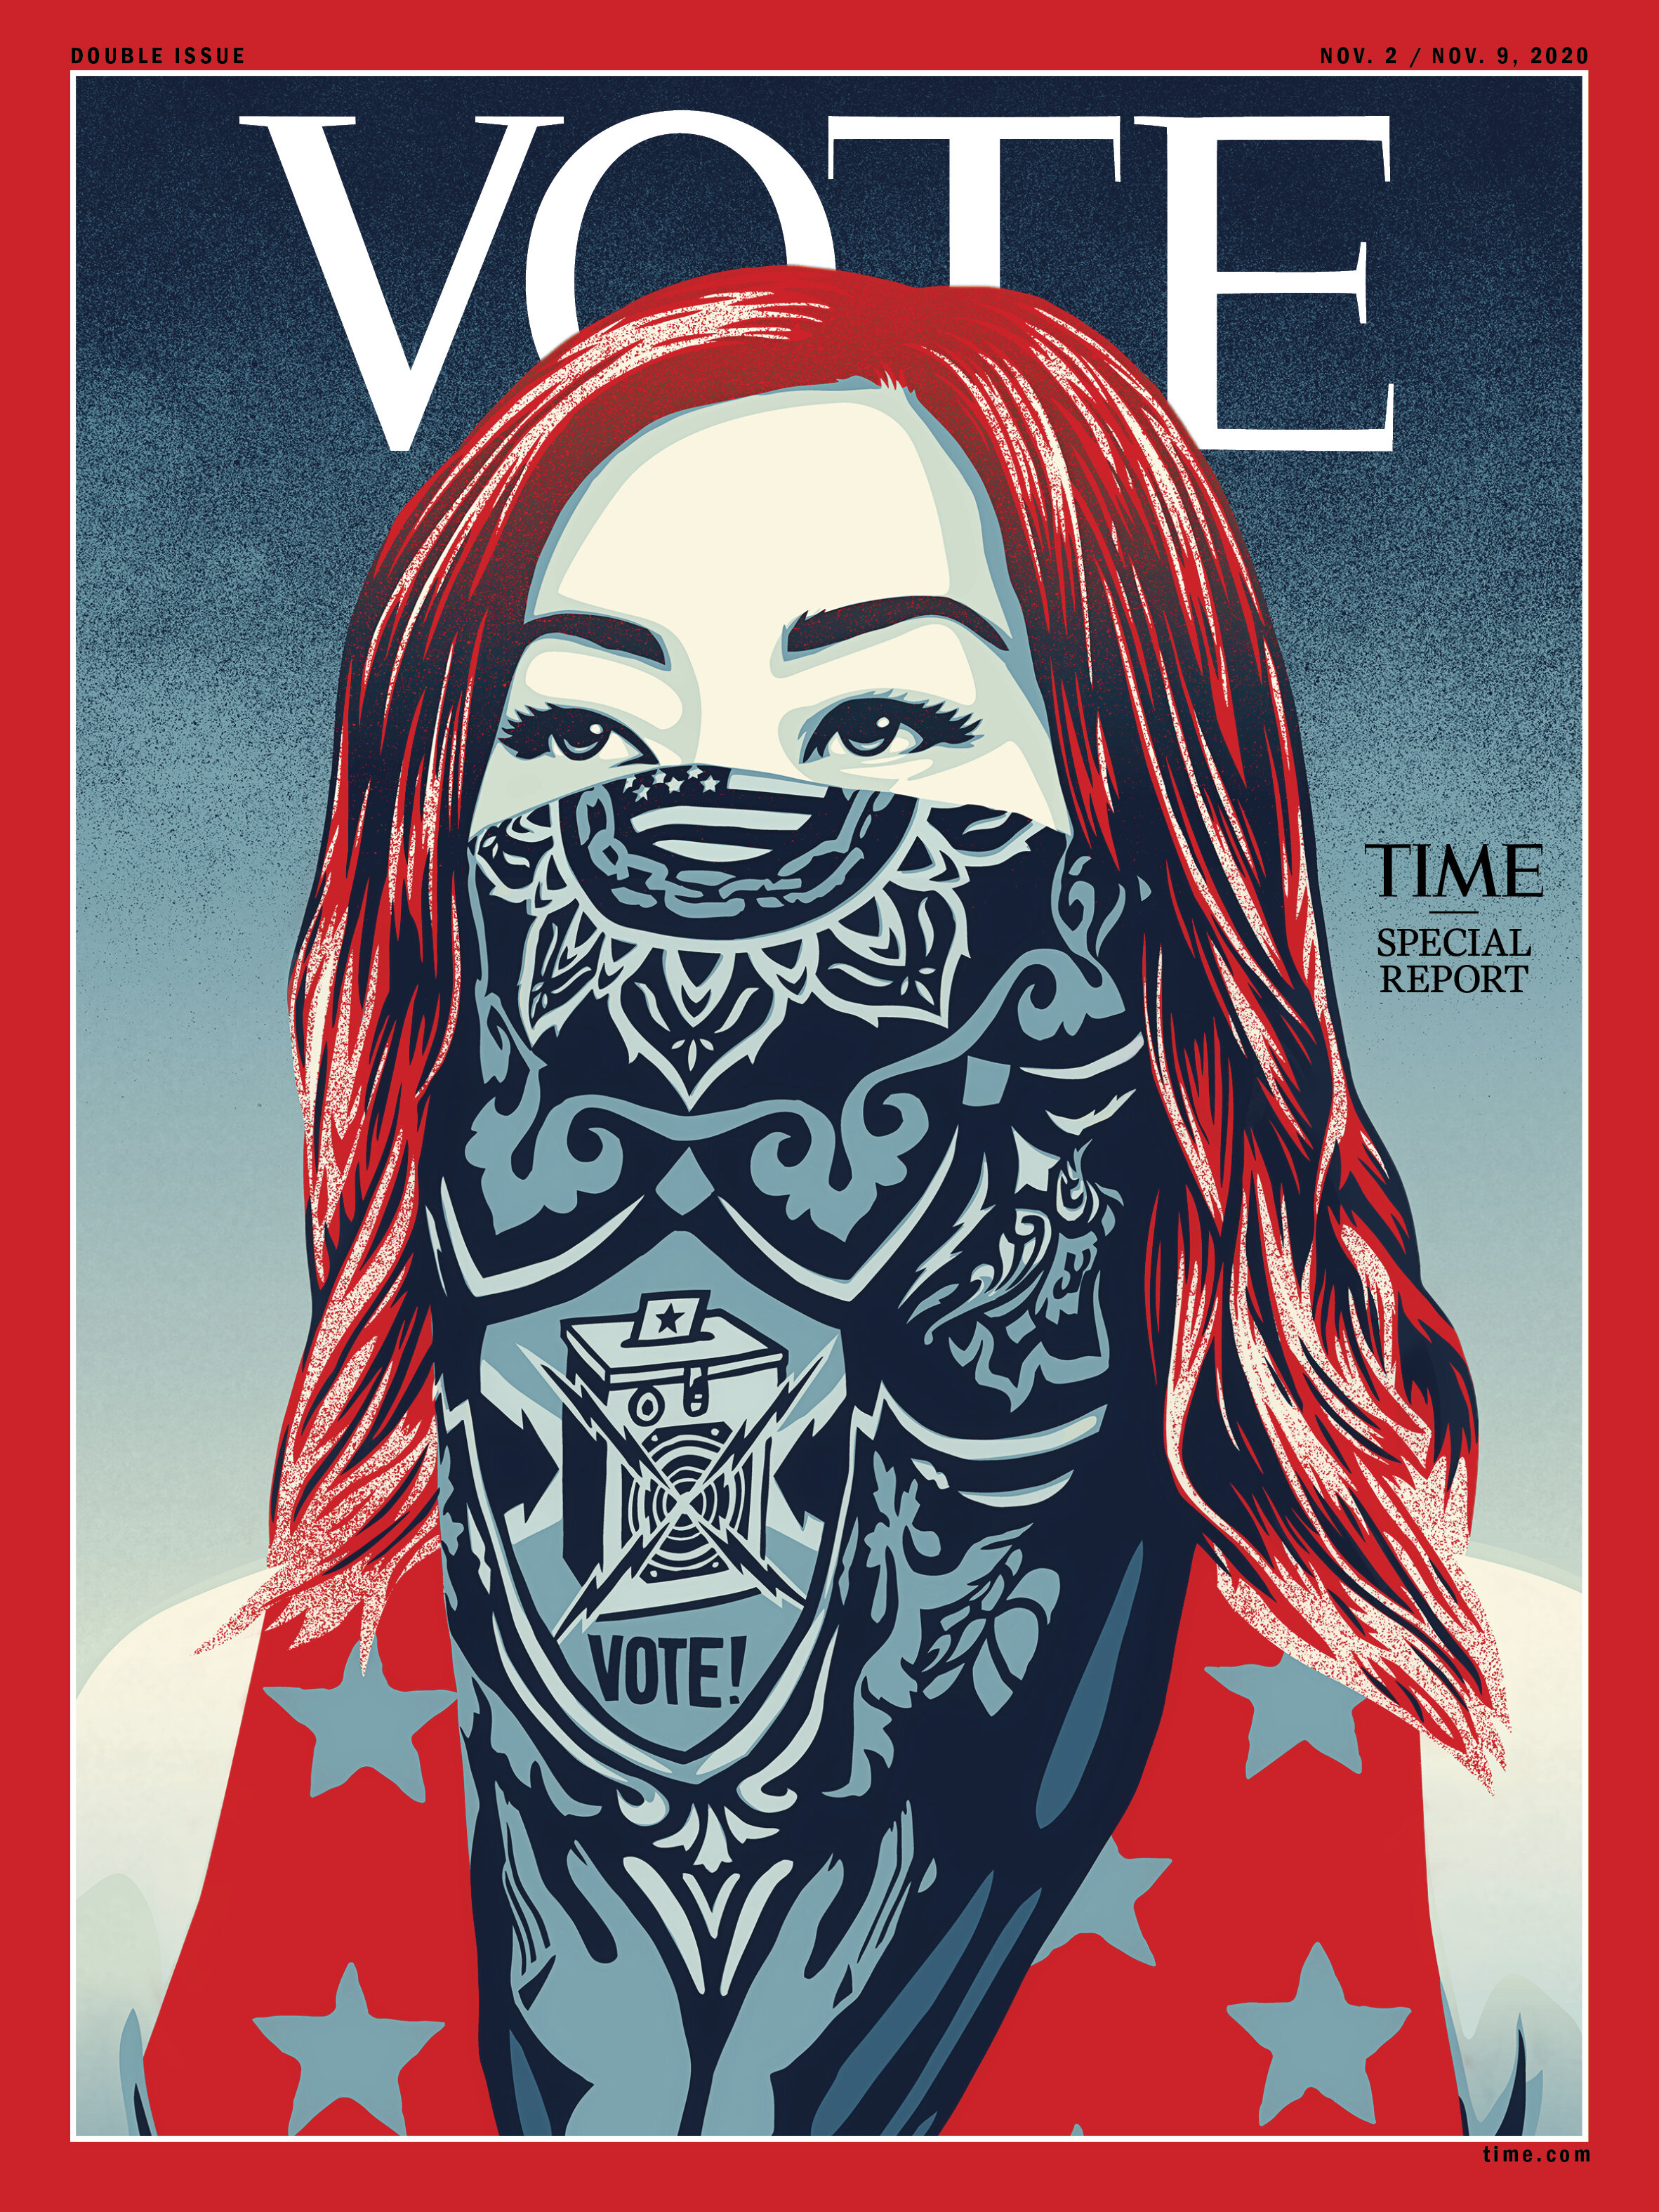  Illustration by Shepard Fairey for TIME 